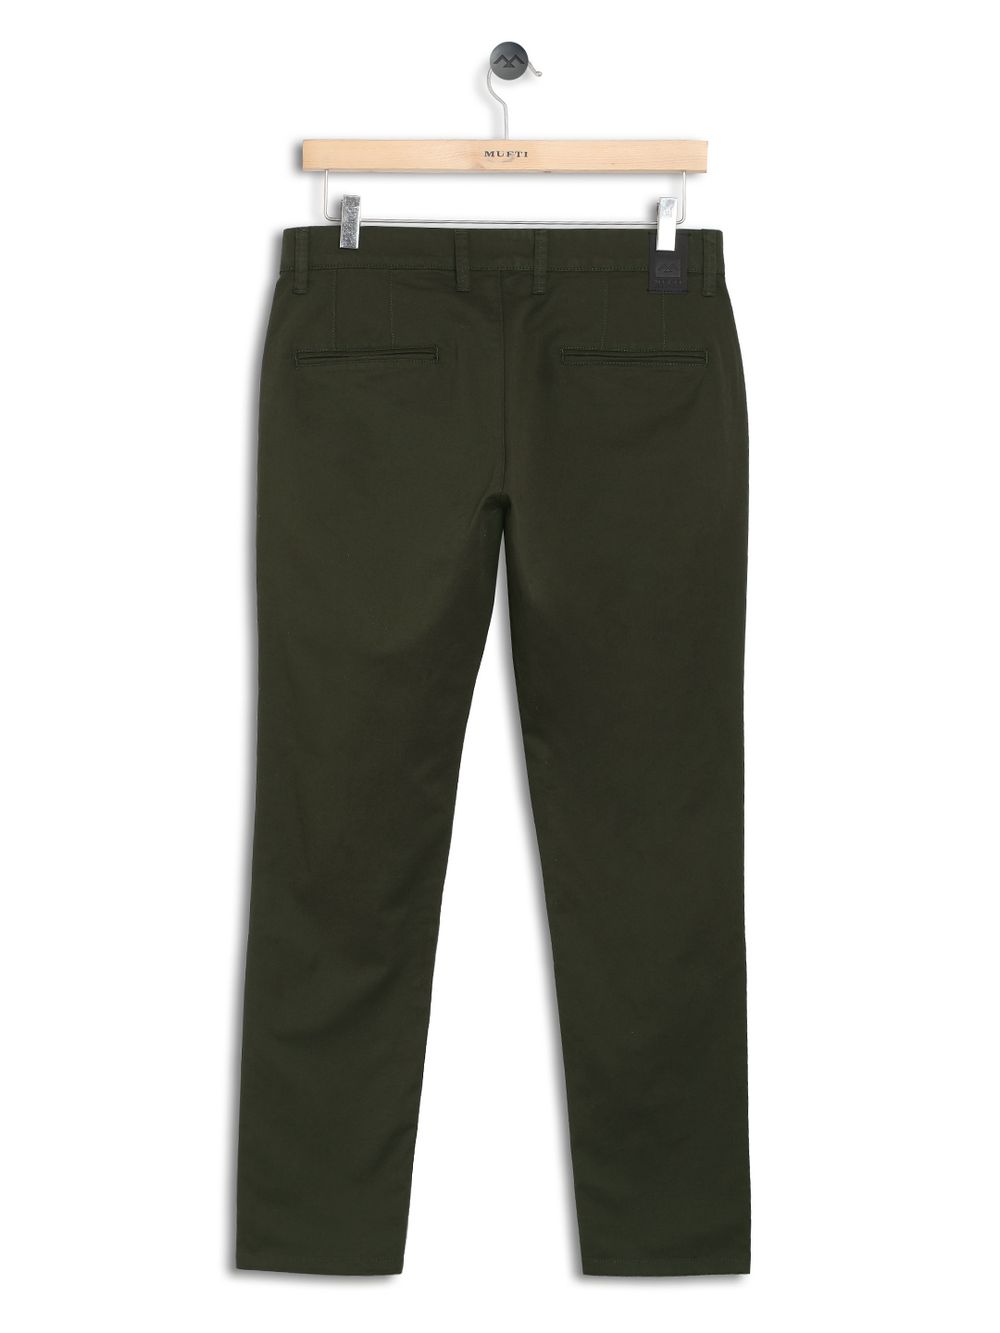 Olive Ankle Length Stretch Chinos